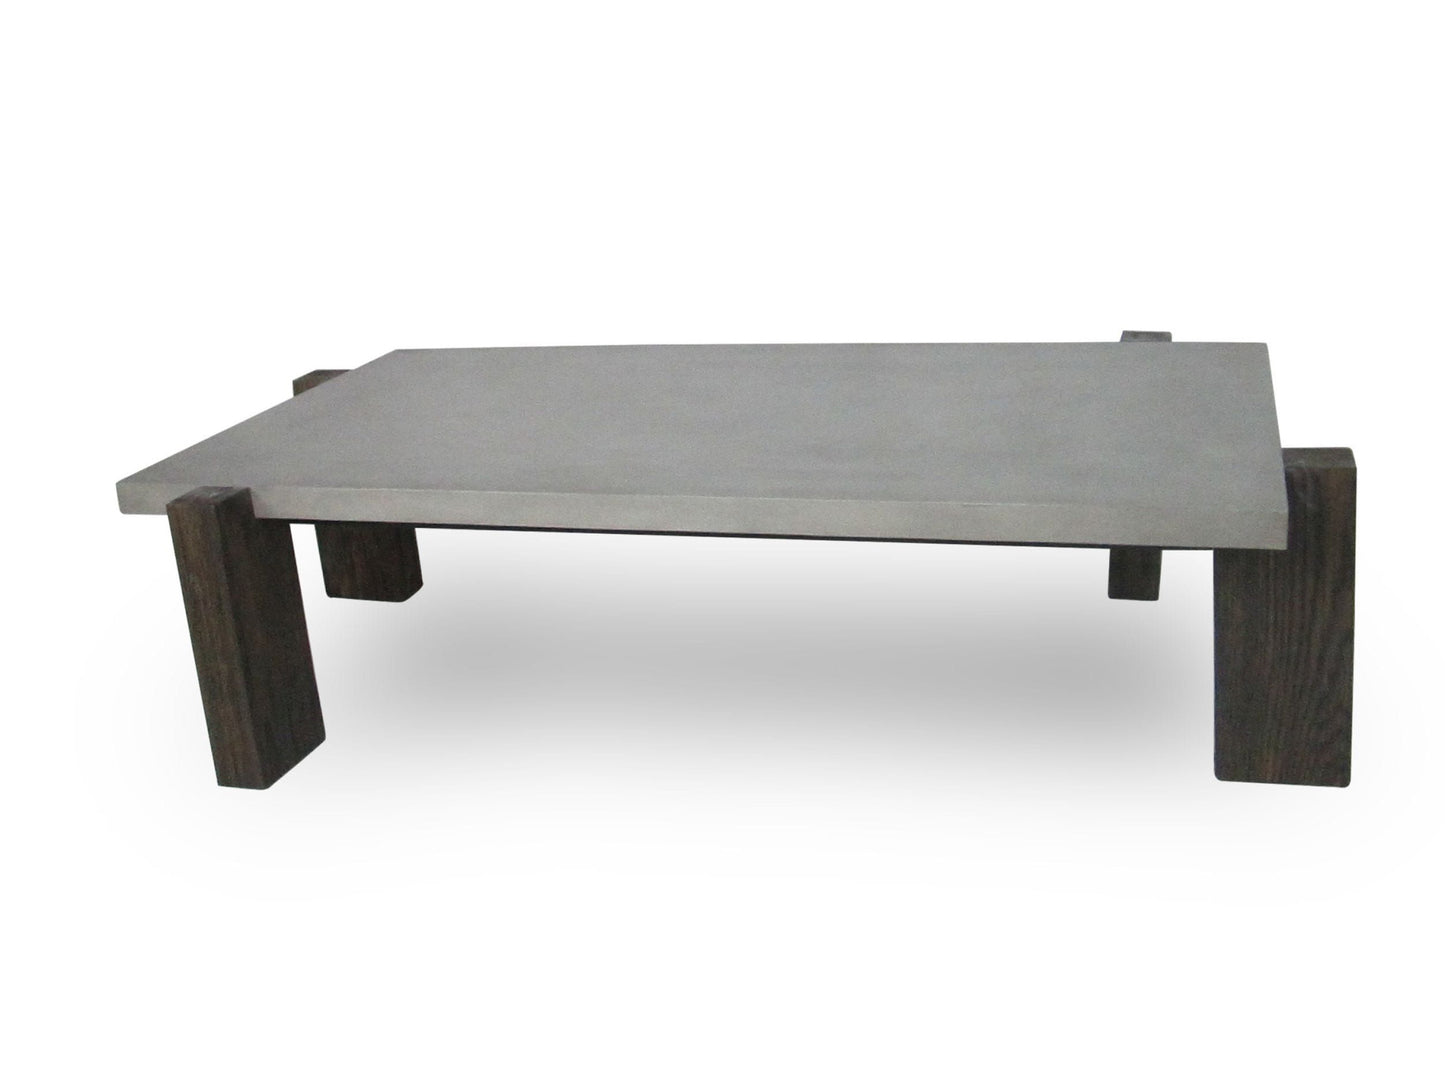 33" Walnut And Dark Grey Concrete Rectangular Coffee Table By Homeroots